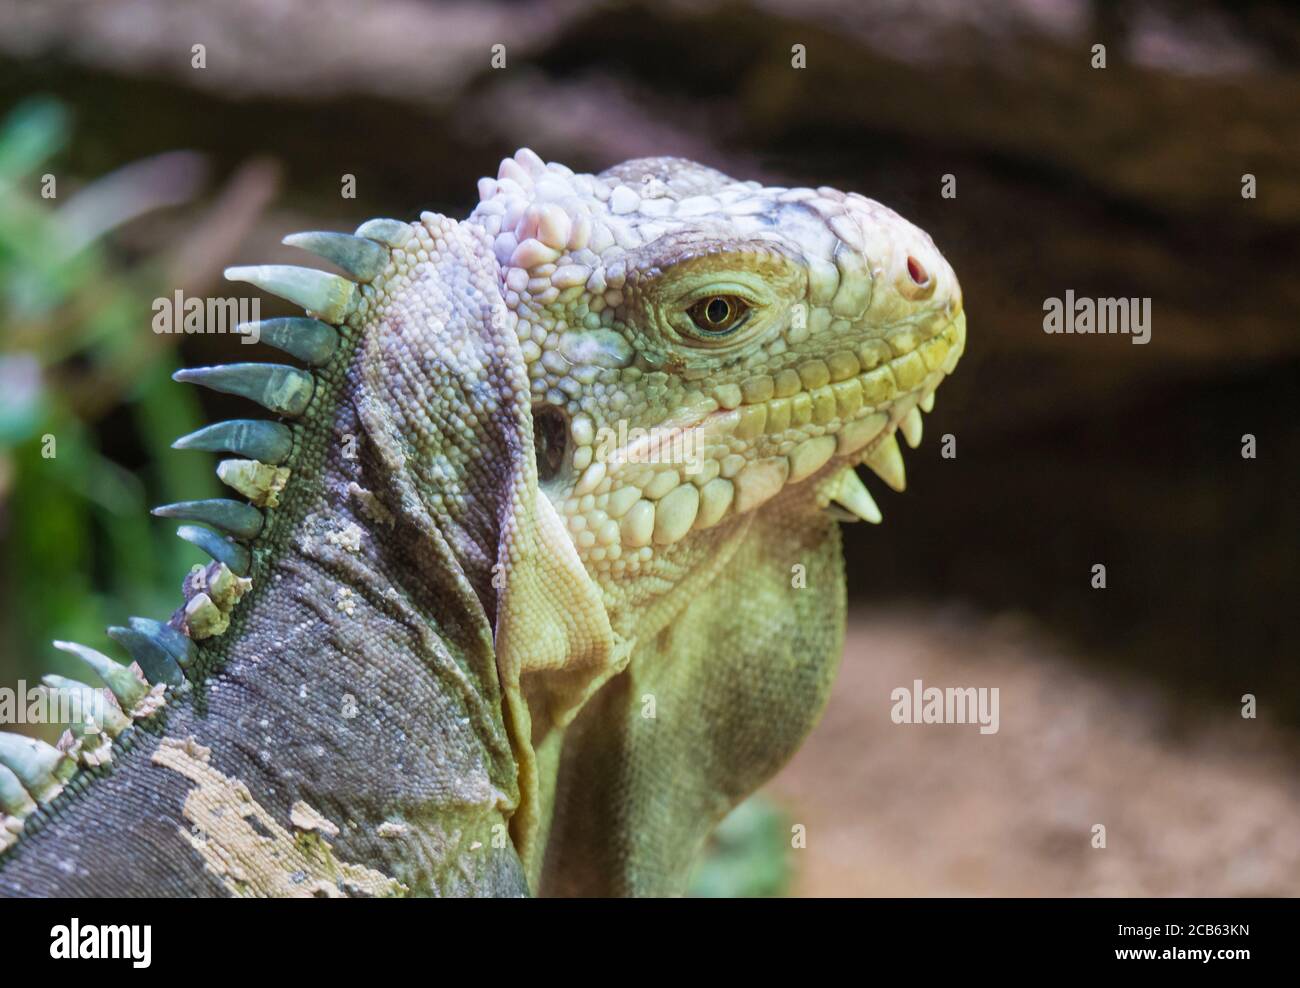 Close up portrait of a lesser Antillean iguana. Igauana delicatissima is a large arboreal lizard endemic to the Lesser Antilles, critically endangered Stock Photo